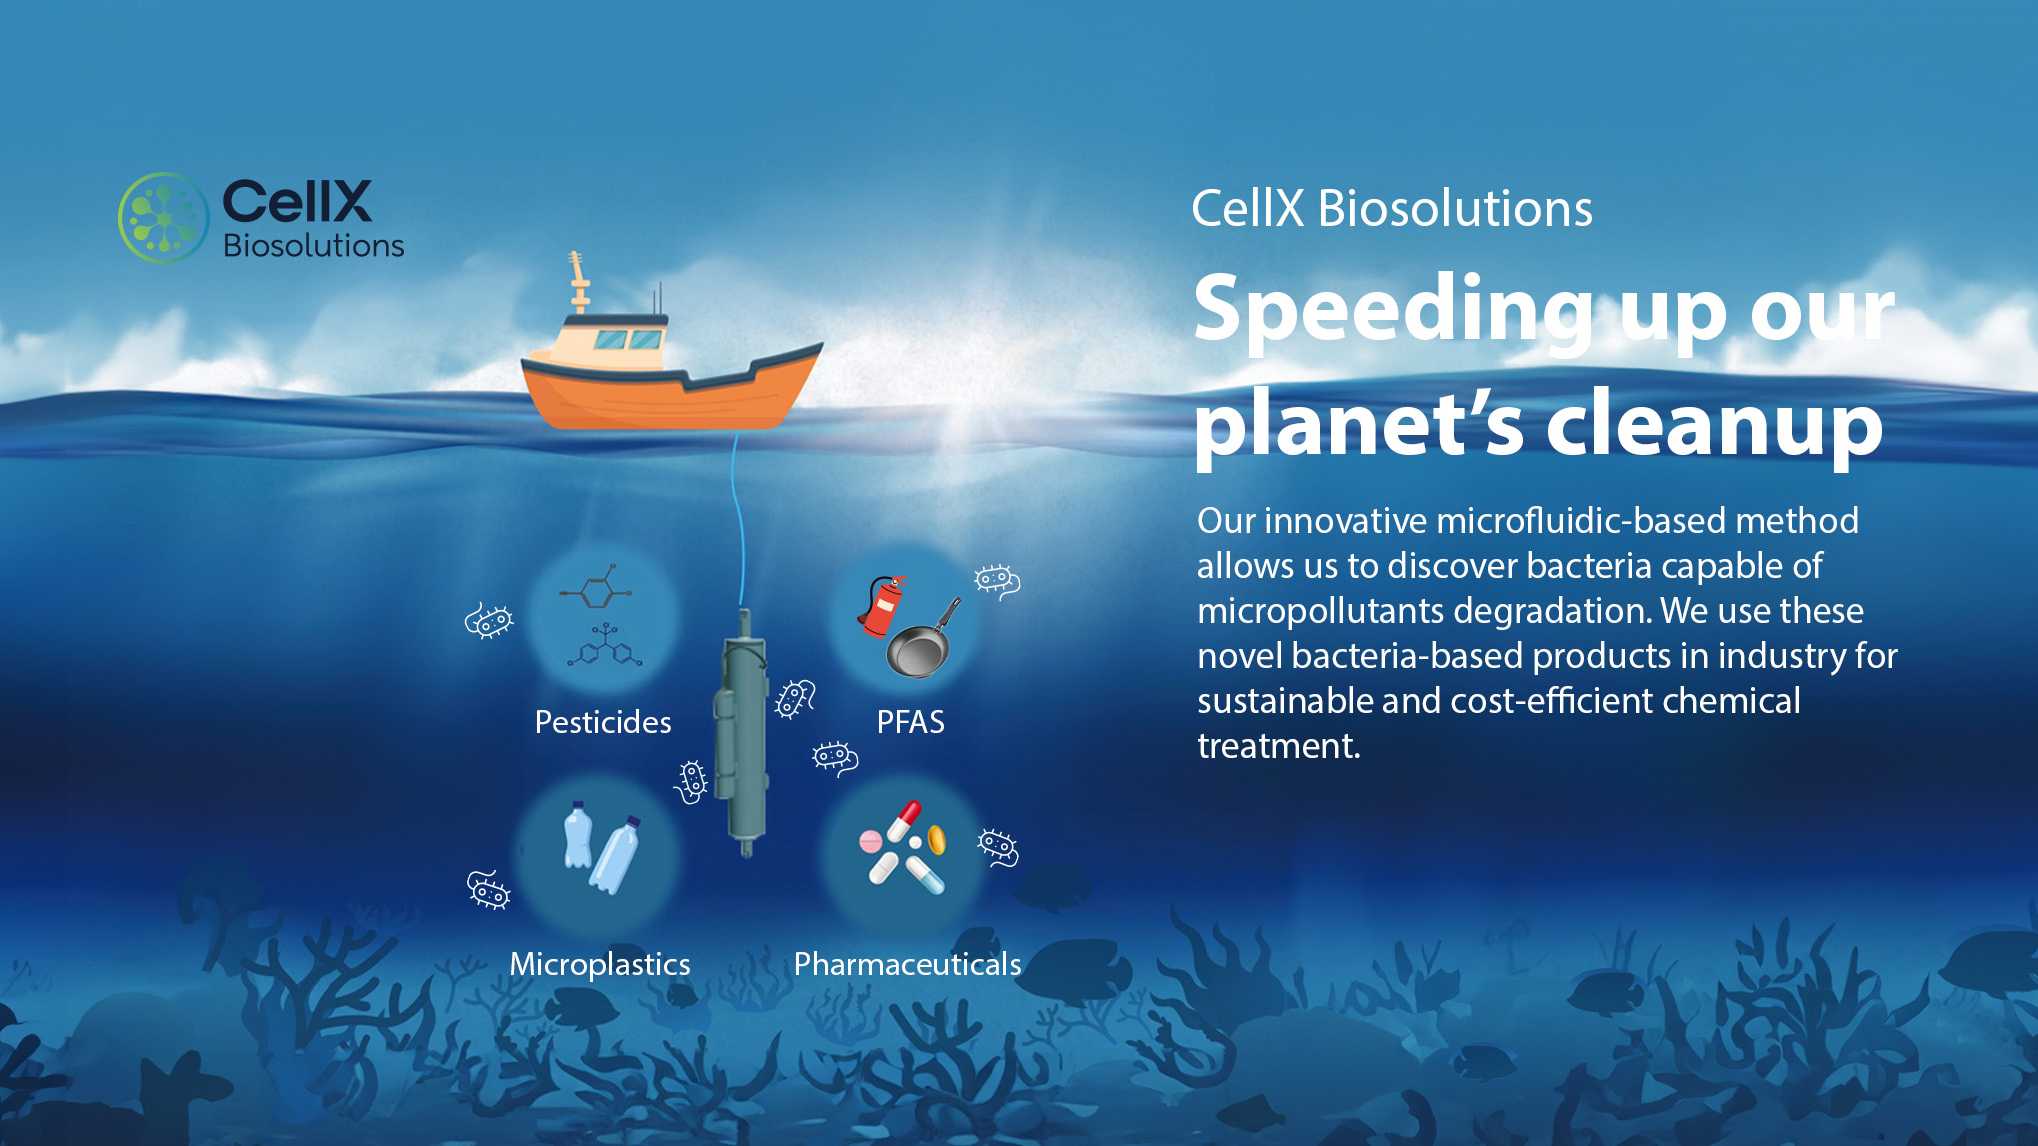 Enlarged view: CellX